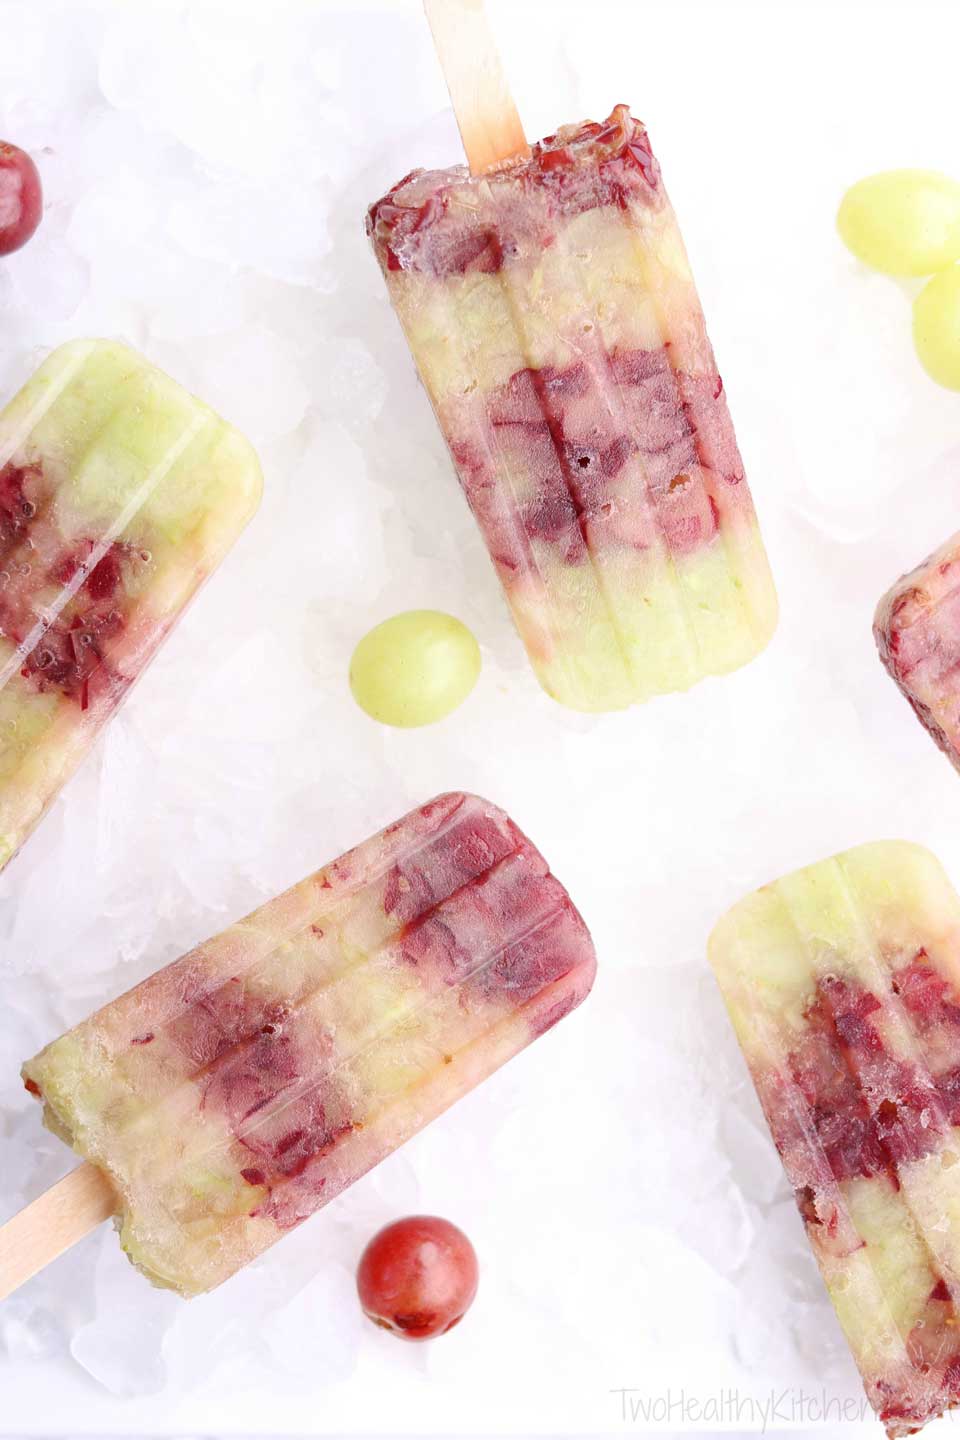 A selection of sugar free frozen grape popsicles on ice with a few whole grapes.